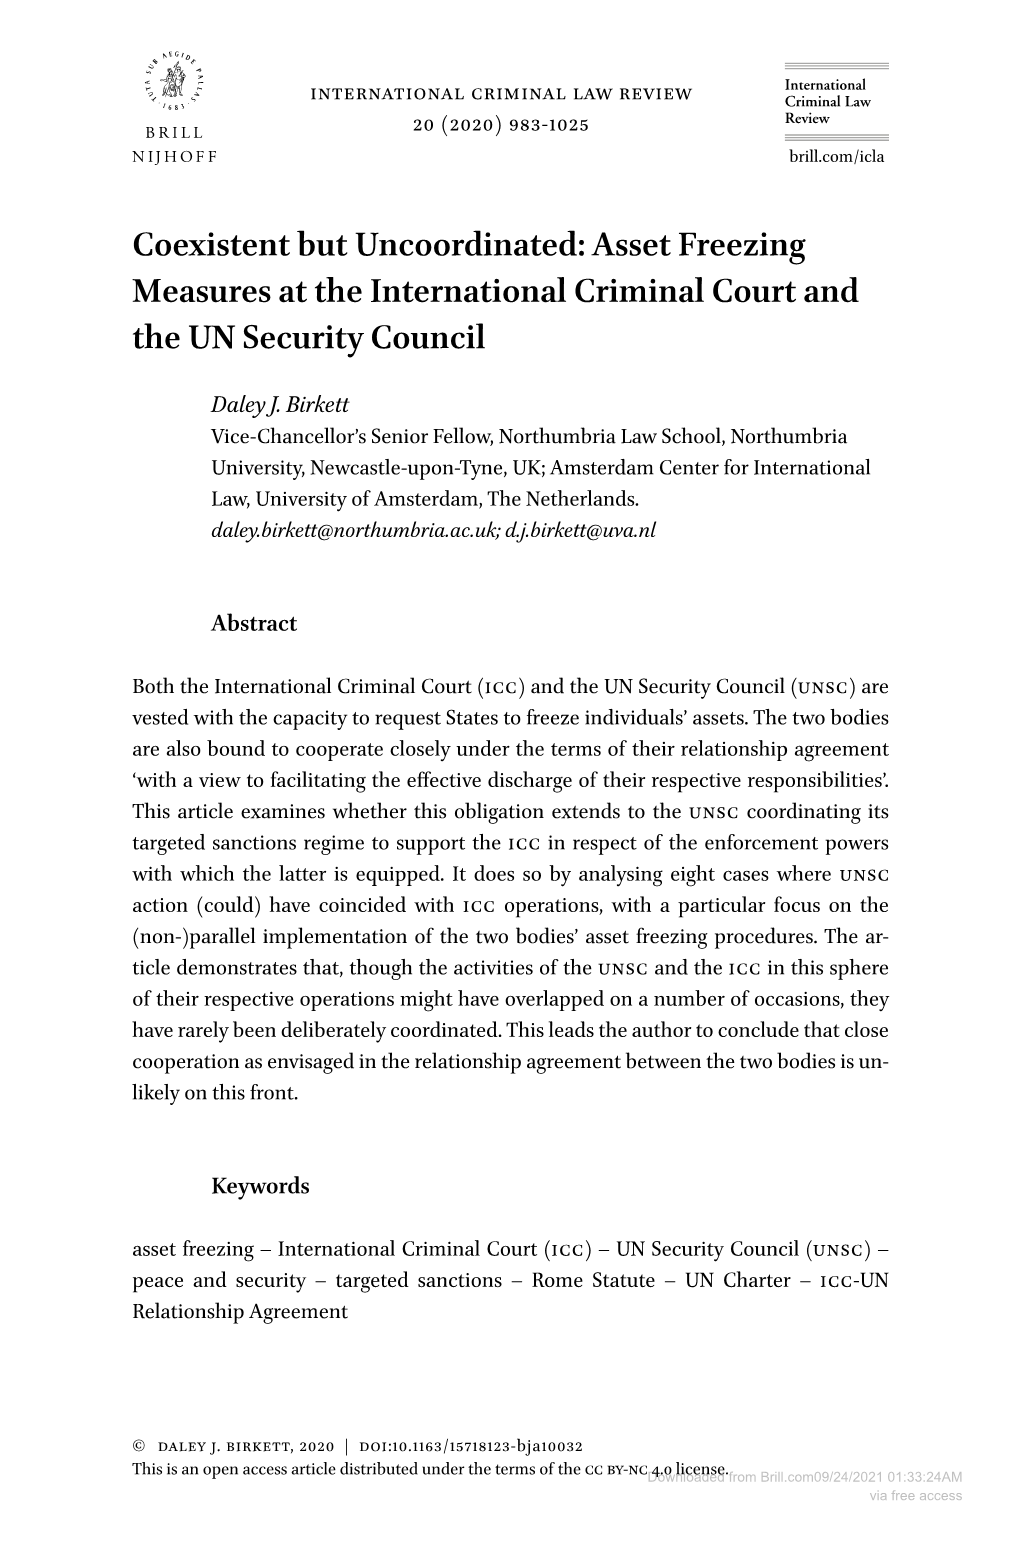 Coexistent but Uncoordinated: Asset Freezing Measures at the International Criminal Court and the UN Security Council